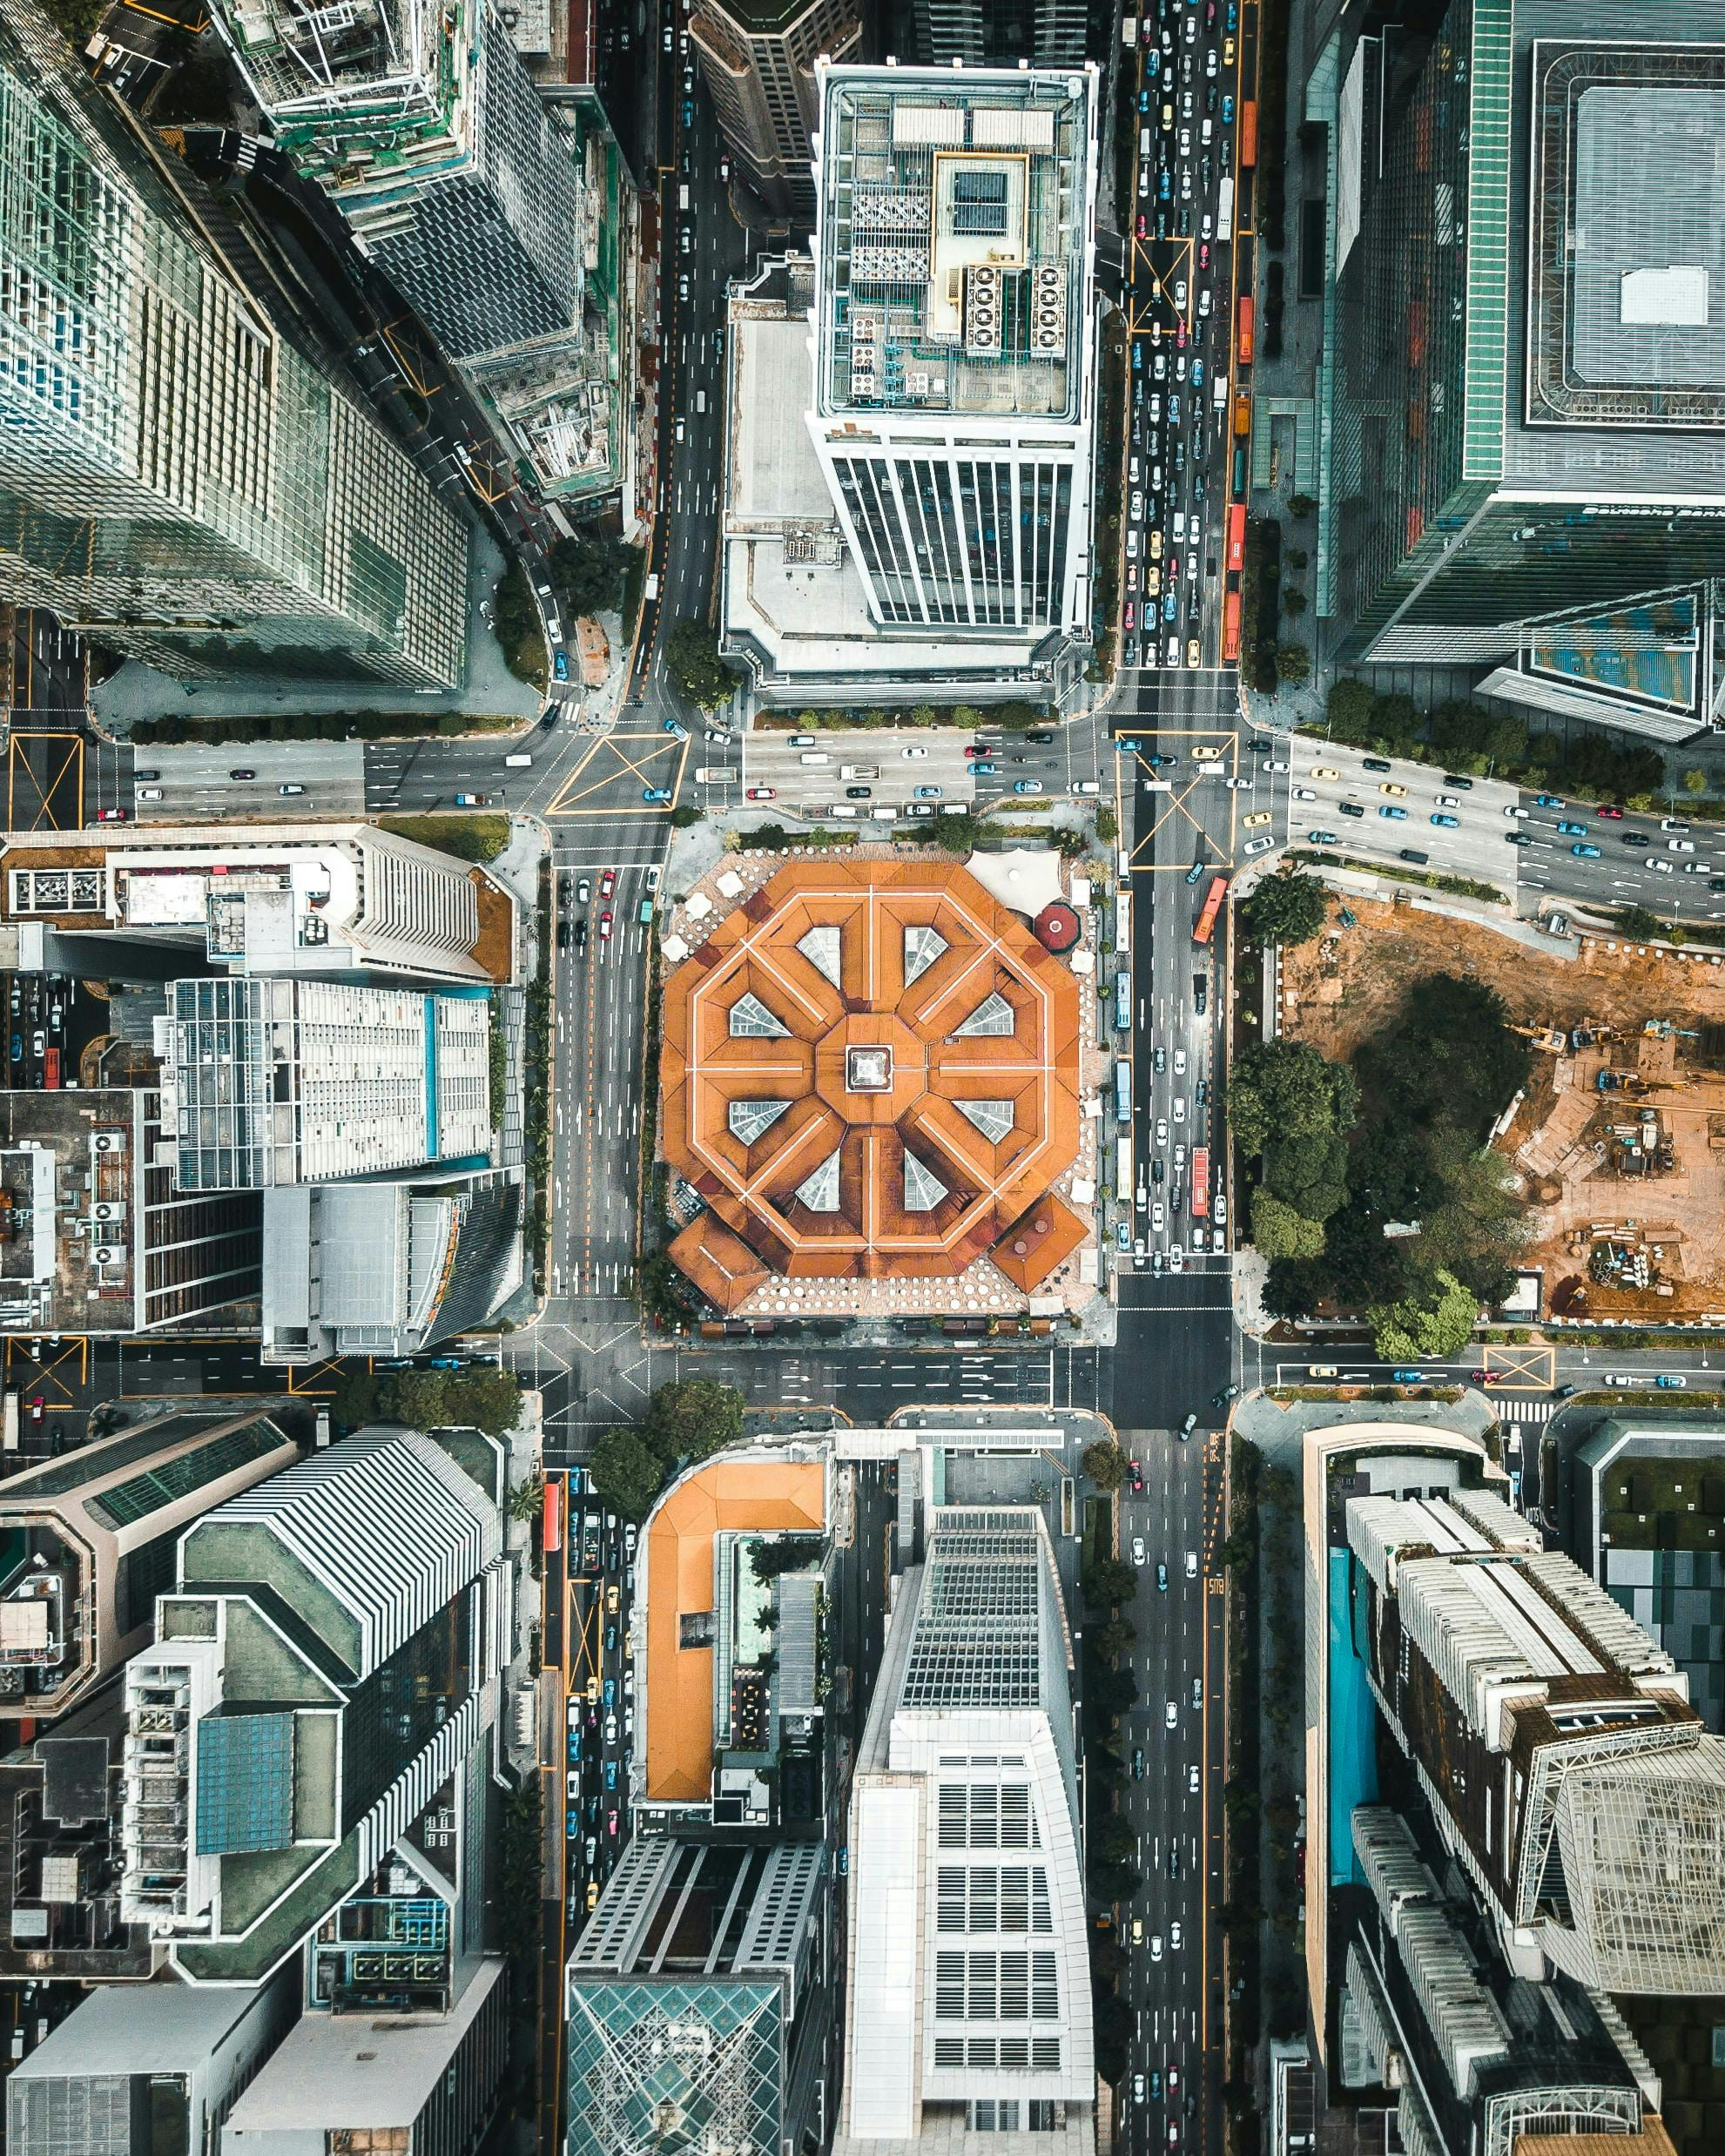 Aerial view of a city intersection with a central octagonal building. Surrounding skyscrapers tower above busy streets lined with cars and a construction site visible at the edge.